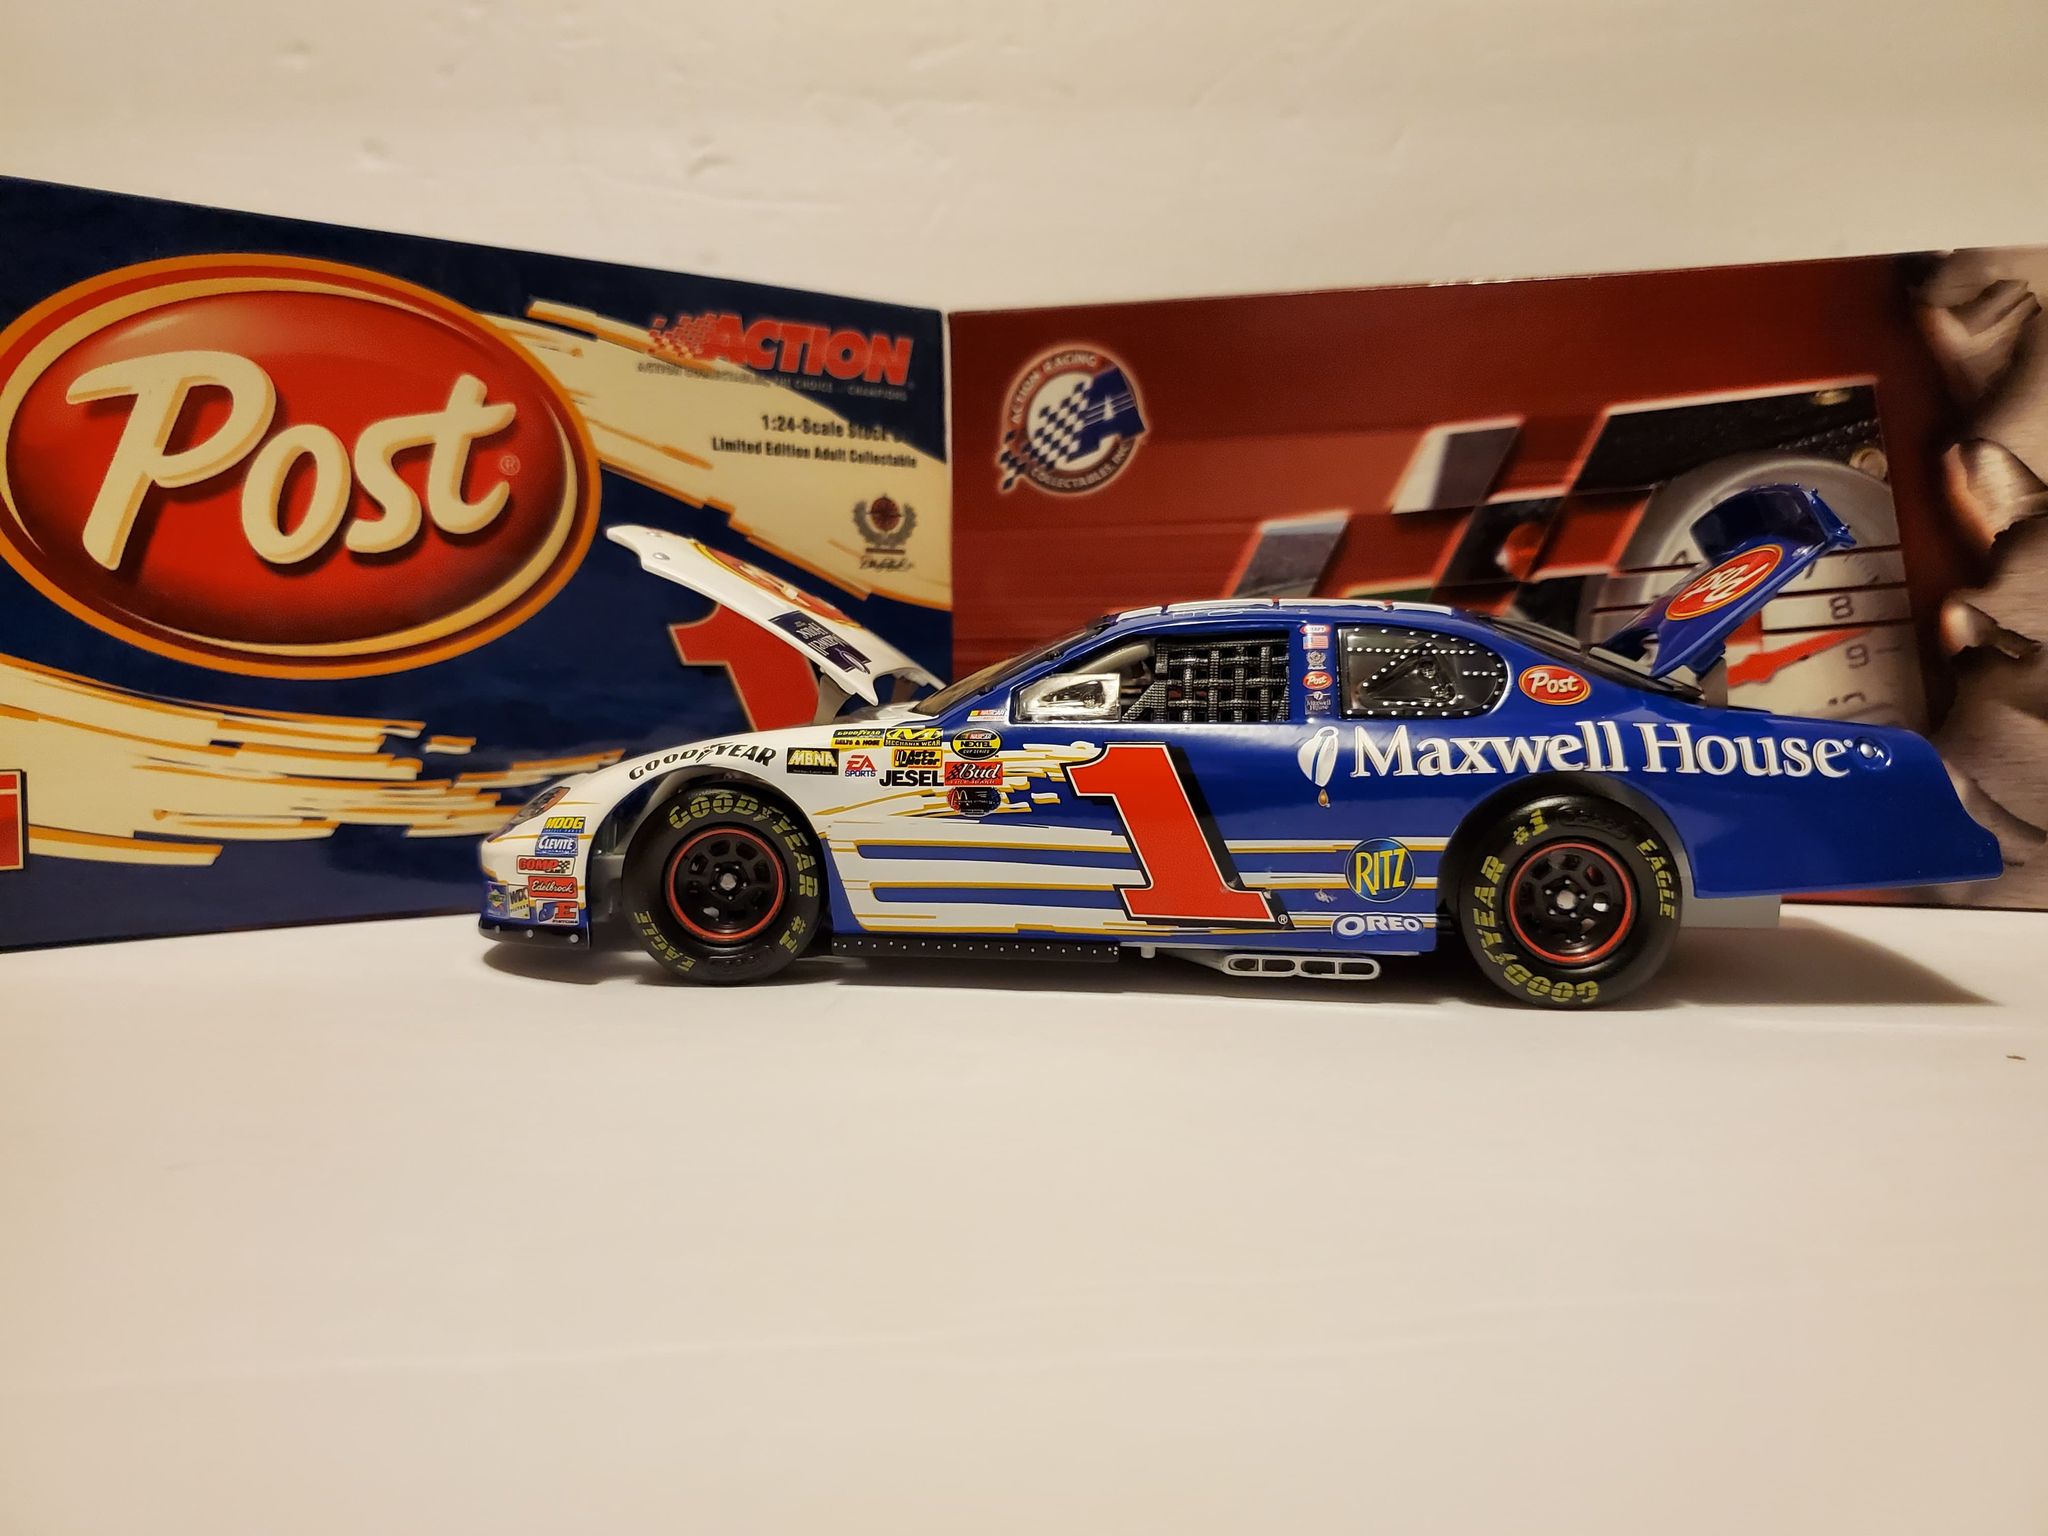 2004 ACTION #1 POST - MAXWELL HOUSE-DIECAST-JOHN ANDRETTI - Second hand -SH001